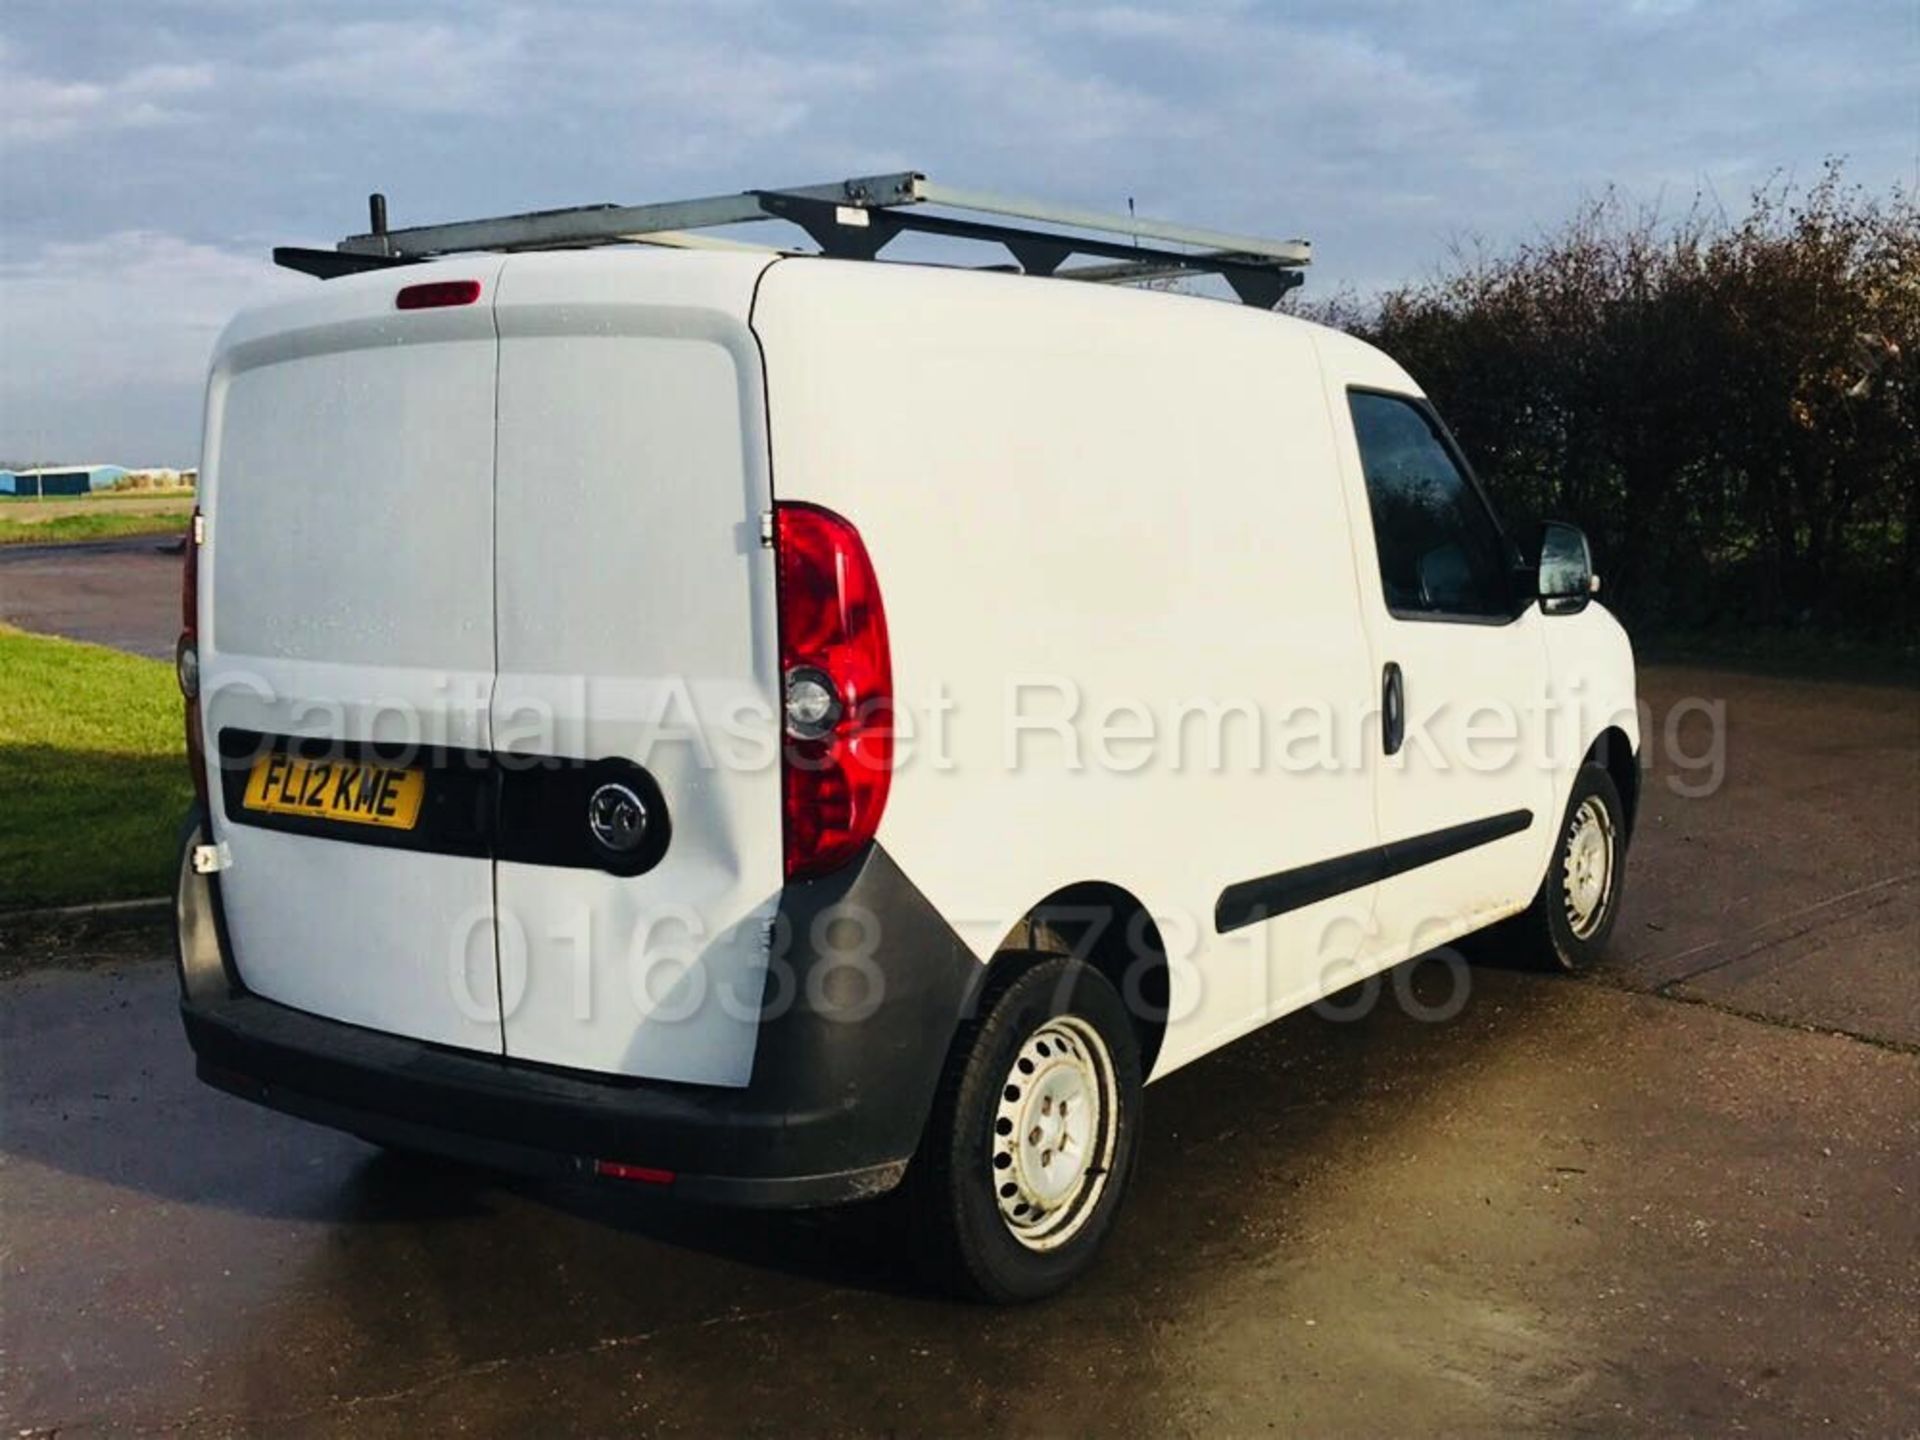 VAUXHALL COMBO 2000 L1H1 (2012 - NEW MODEL) '1.6 CDTI - 105 BHP - STOP / START' (1 OWNER FROM NEW) - Image 5 of 15